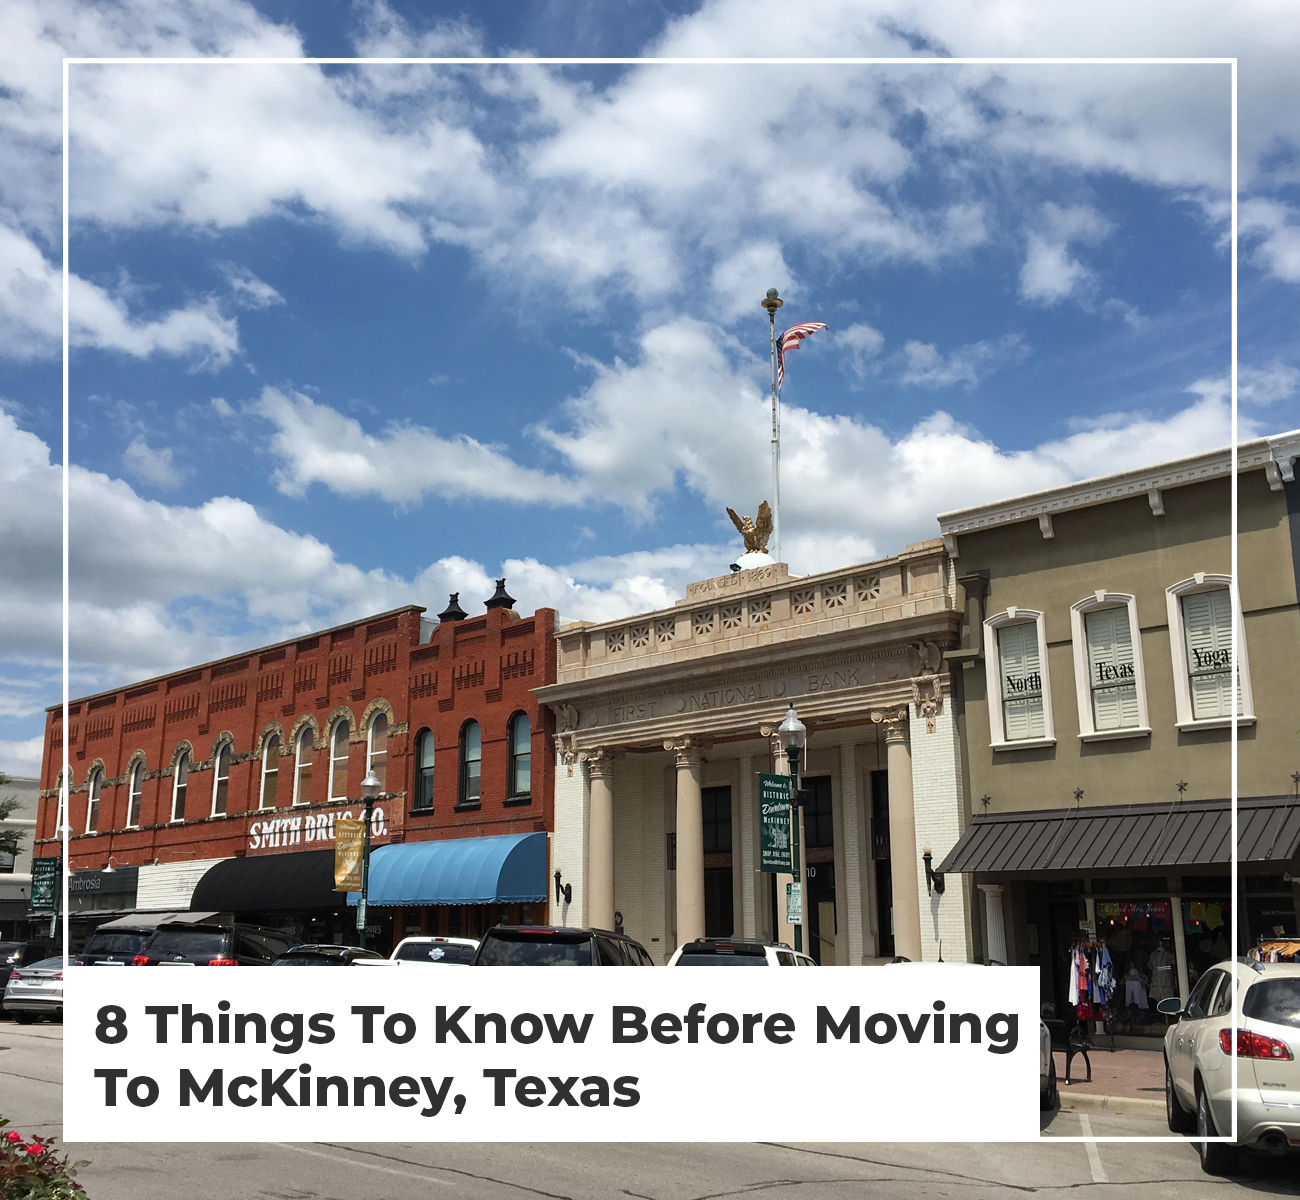 8 Things To Know Before Moving To McKinney, Texas